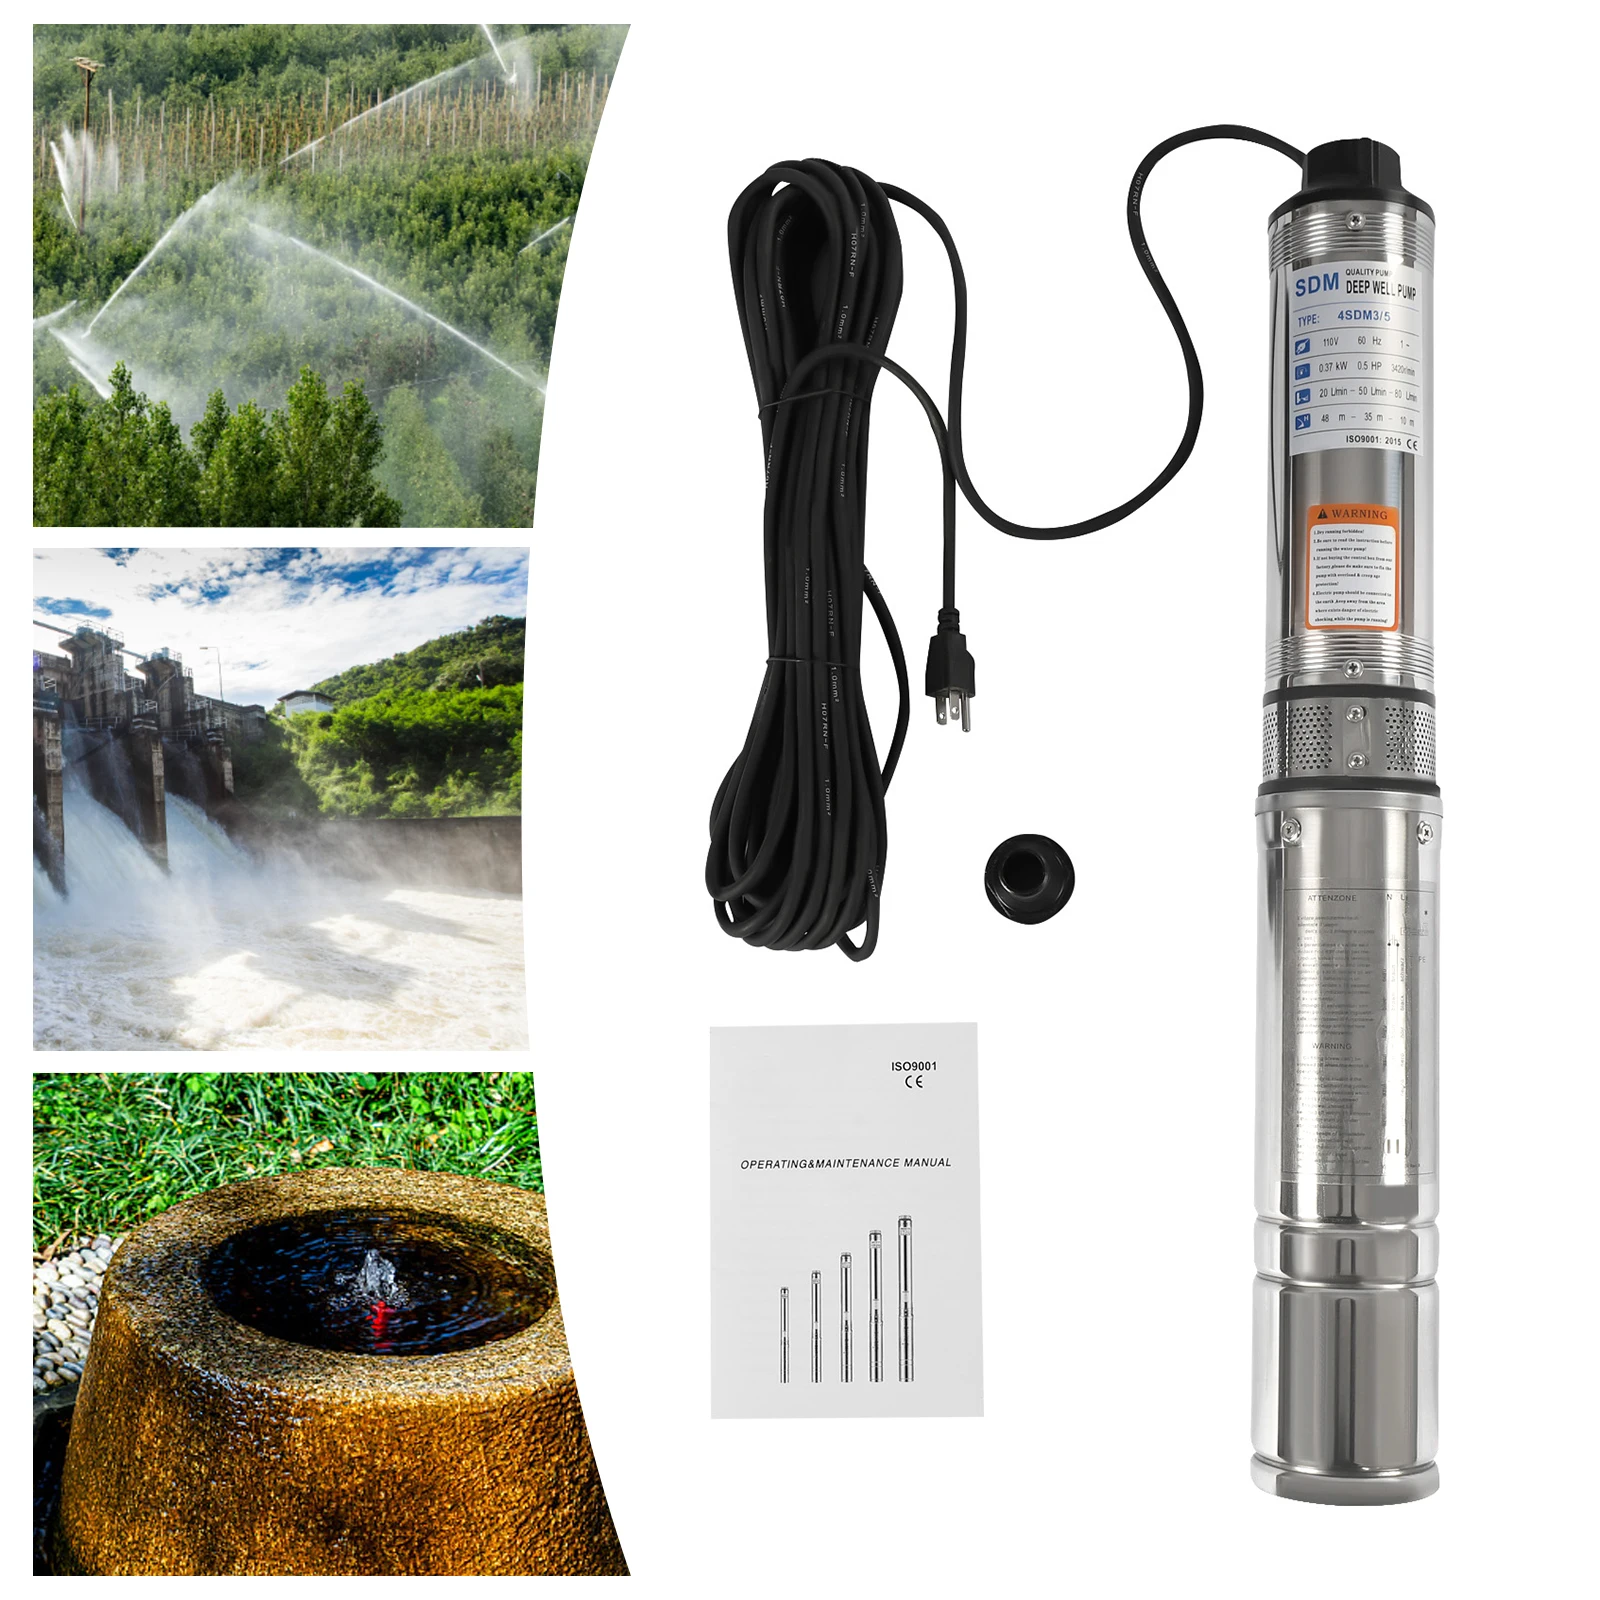 

Submersible Pumps OD Pipe 110V/60HZ 0.37KW 0.5HP Stainless Steel submersible well pump 1.25" Outlet Submersible Bore Pump submer